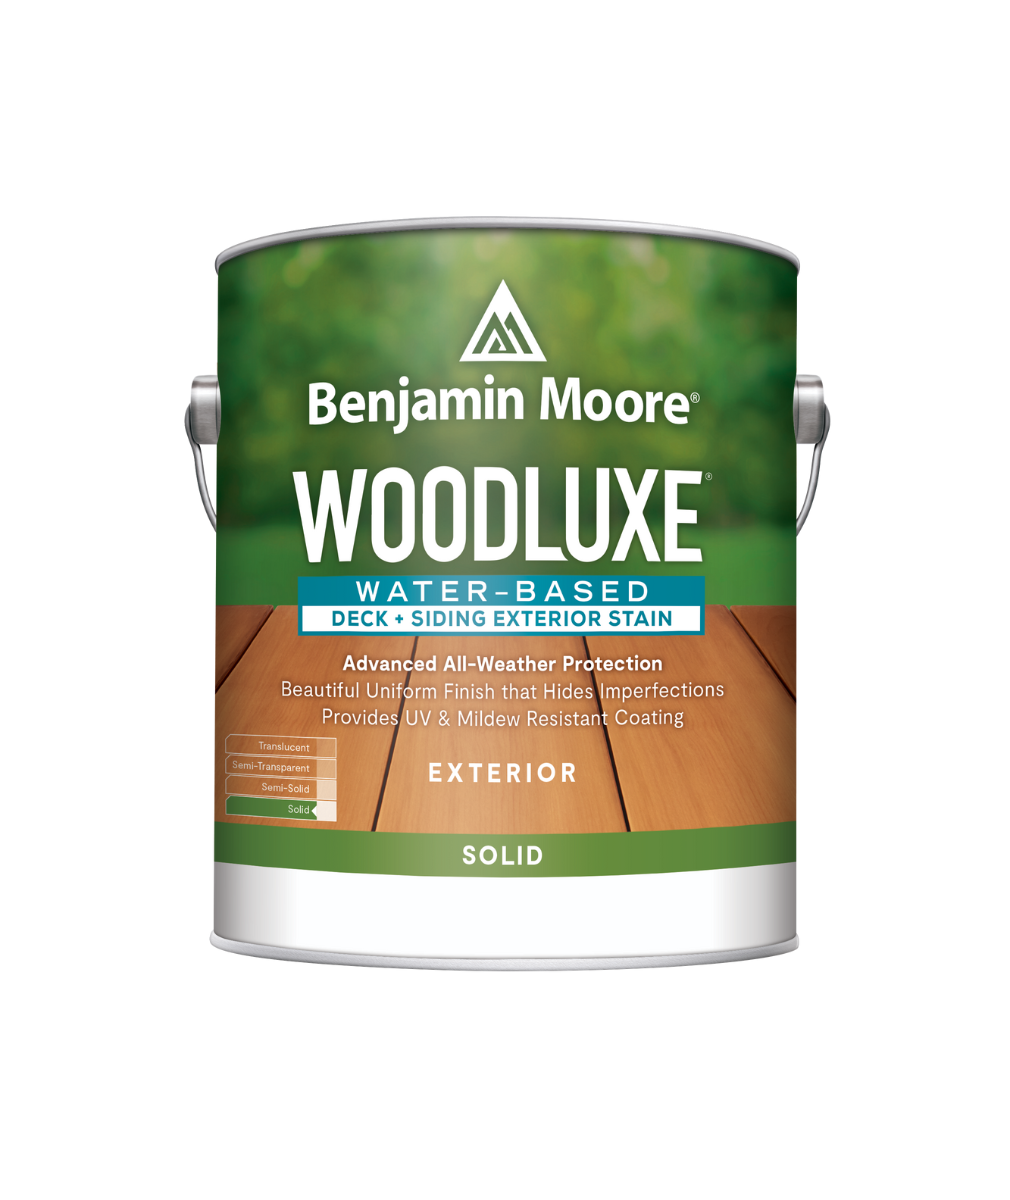 Benjamin Moore Woodluxe® Water-Based Solid Exterior Stain available at Clement's Paint in Austin, Texas.